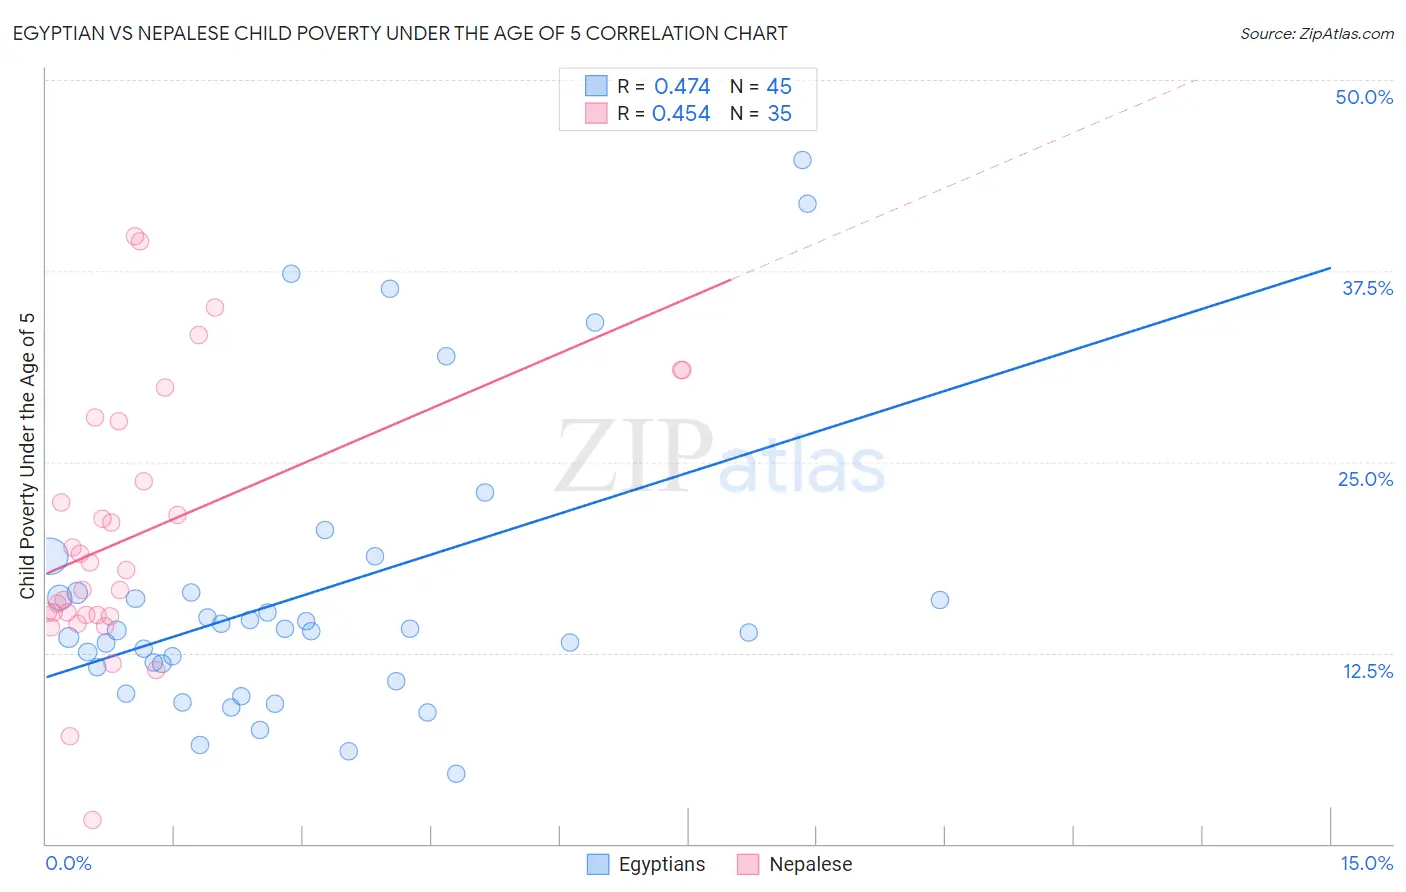 Egyptian vs Nepalese Child Poverty Under the Age of 5